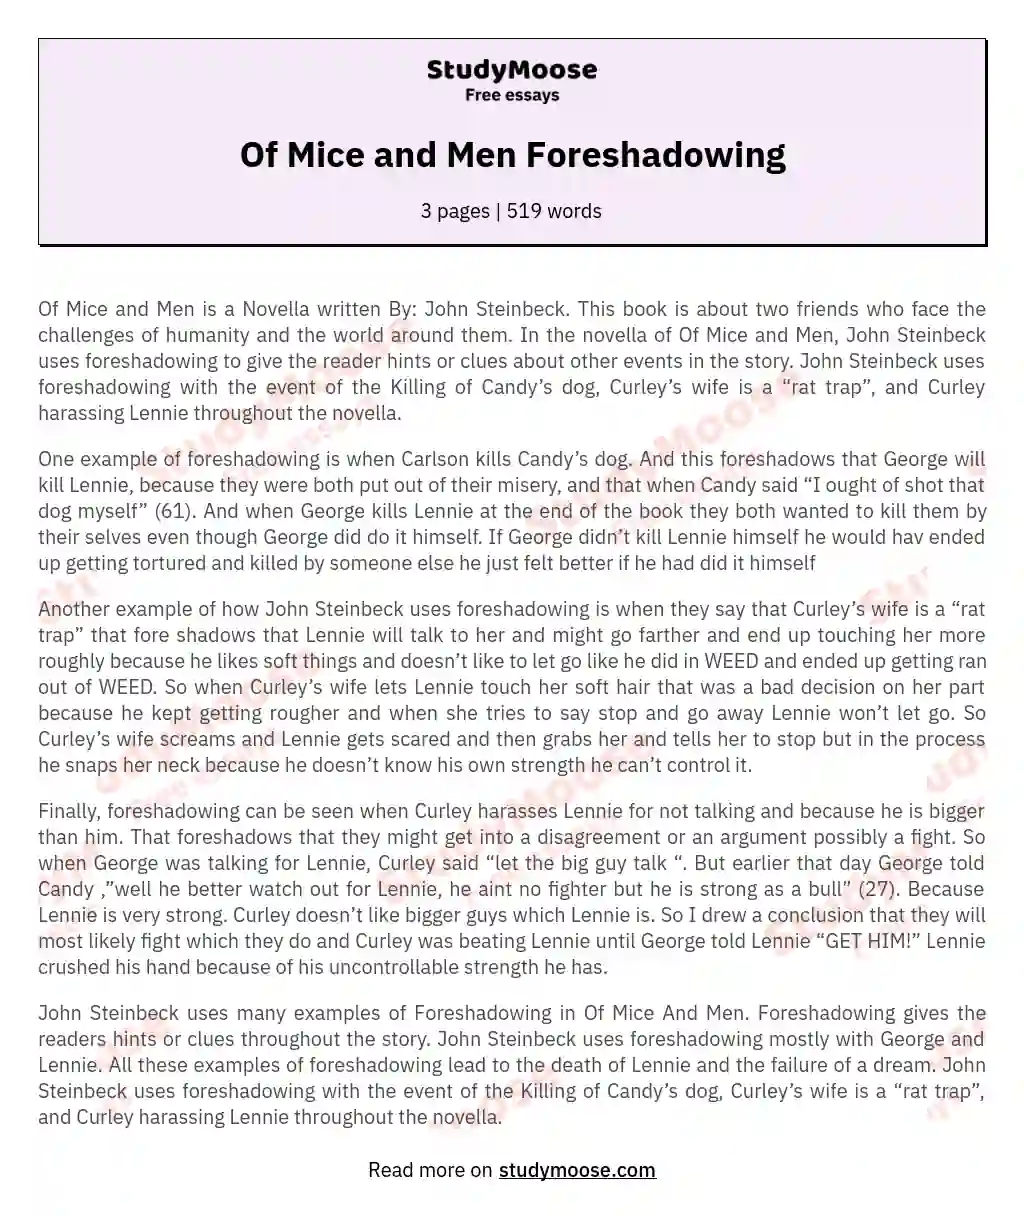 Exploring Foreshadowing in "Of Mice and Men" essay